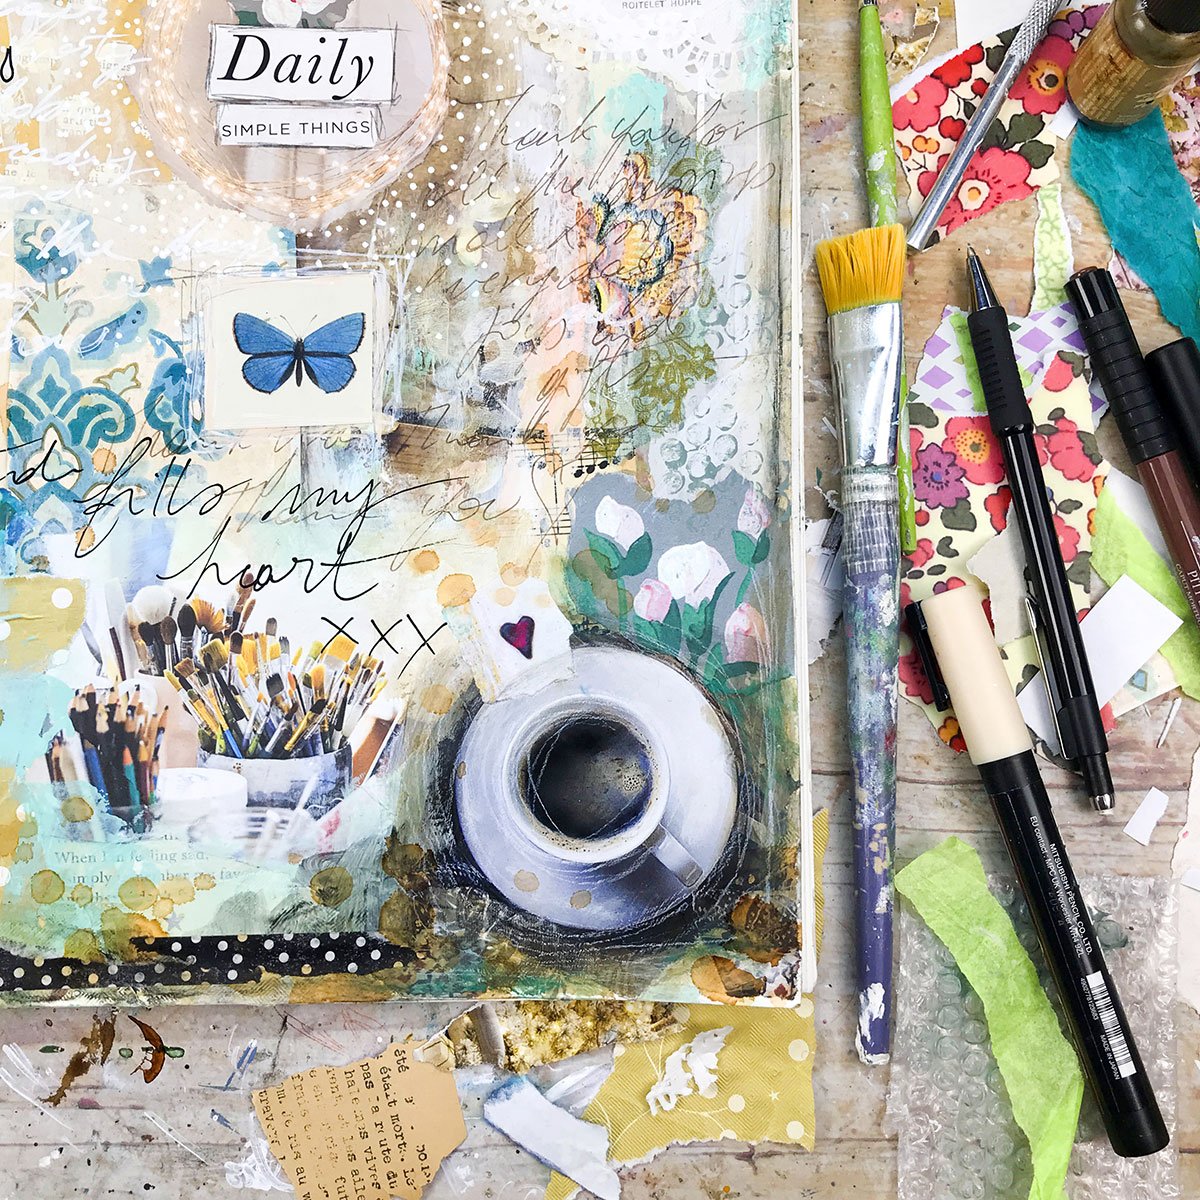 American Crafts Studio Blog: How to Easily Create a Mixed Media Art Journal